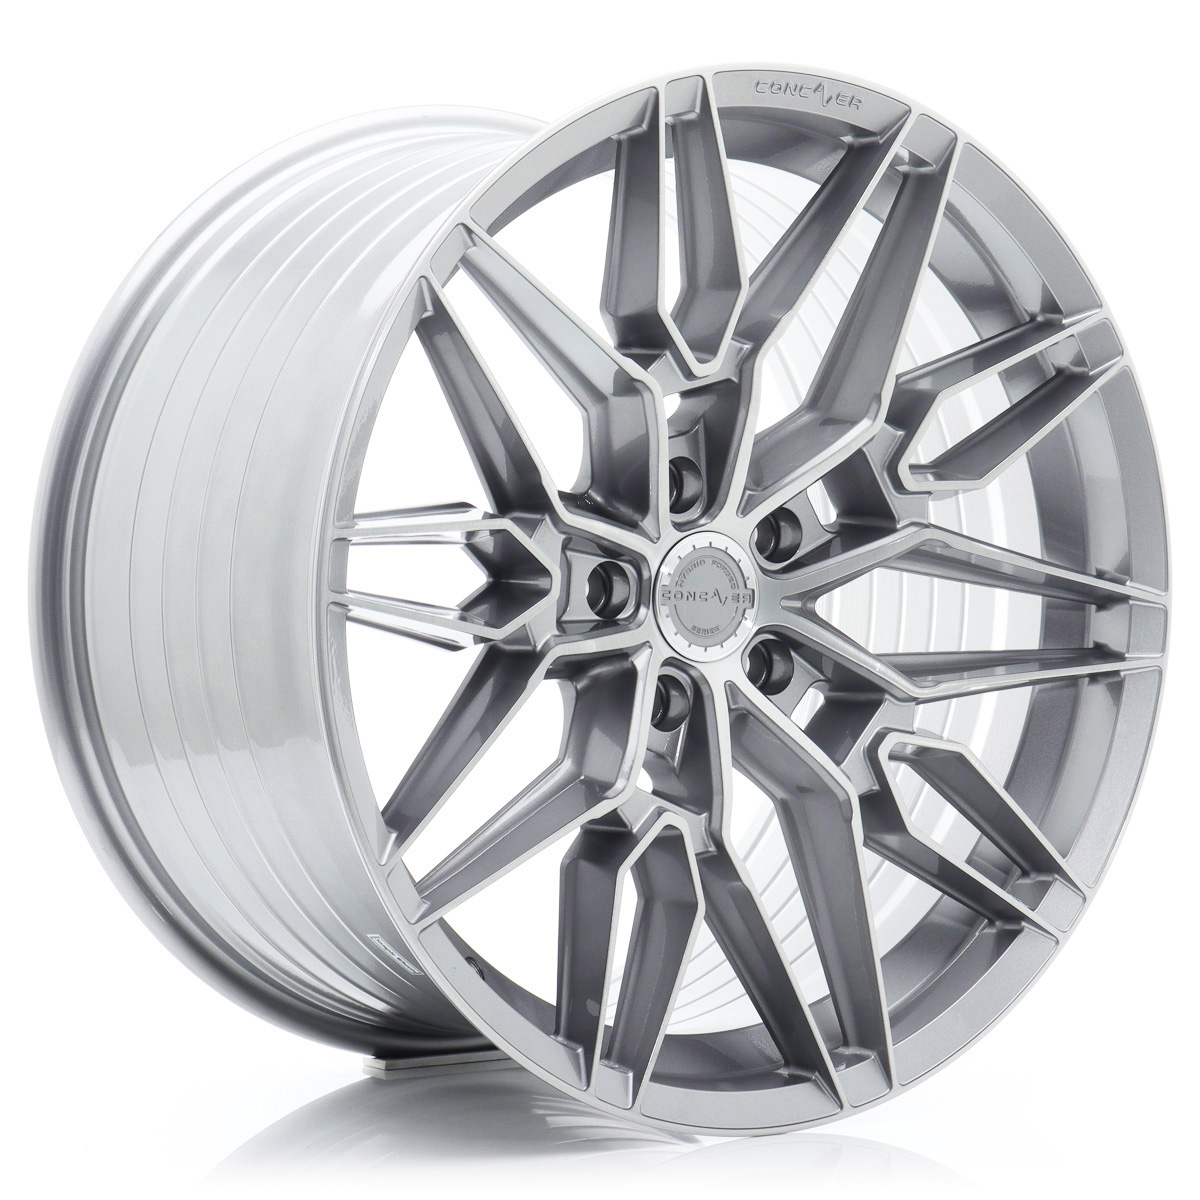 Concaver Wheels - Hybrid forged wheels collection